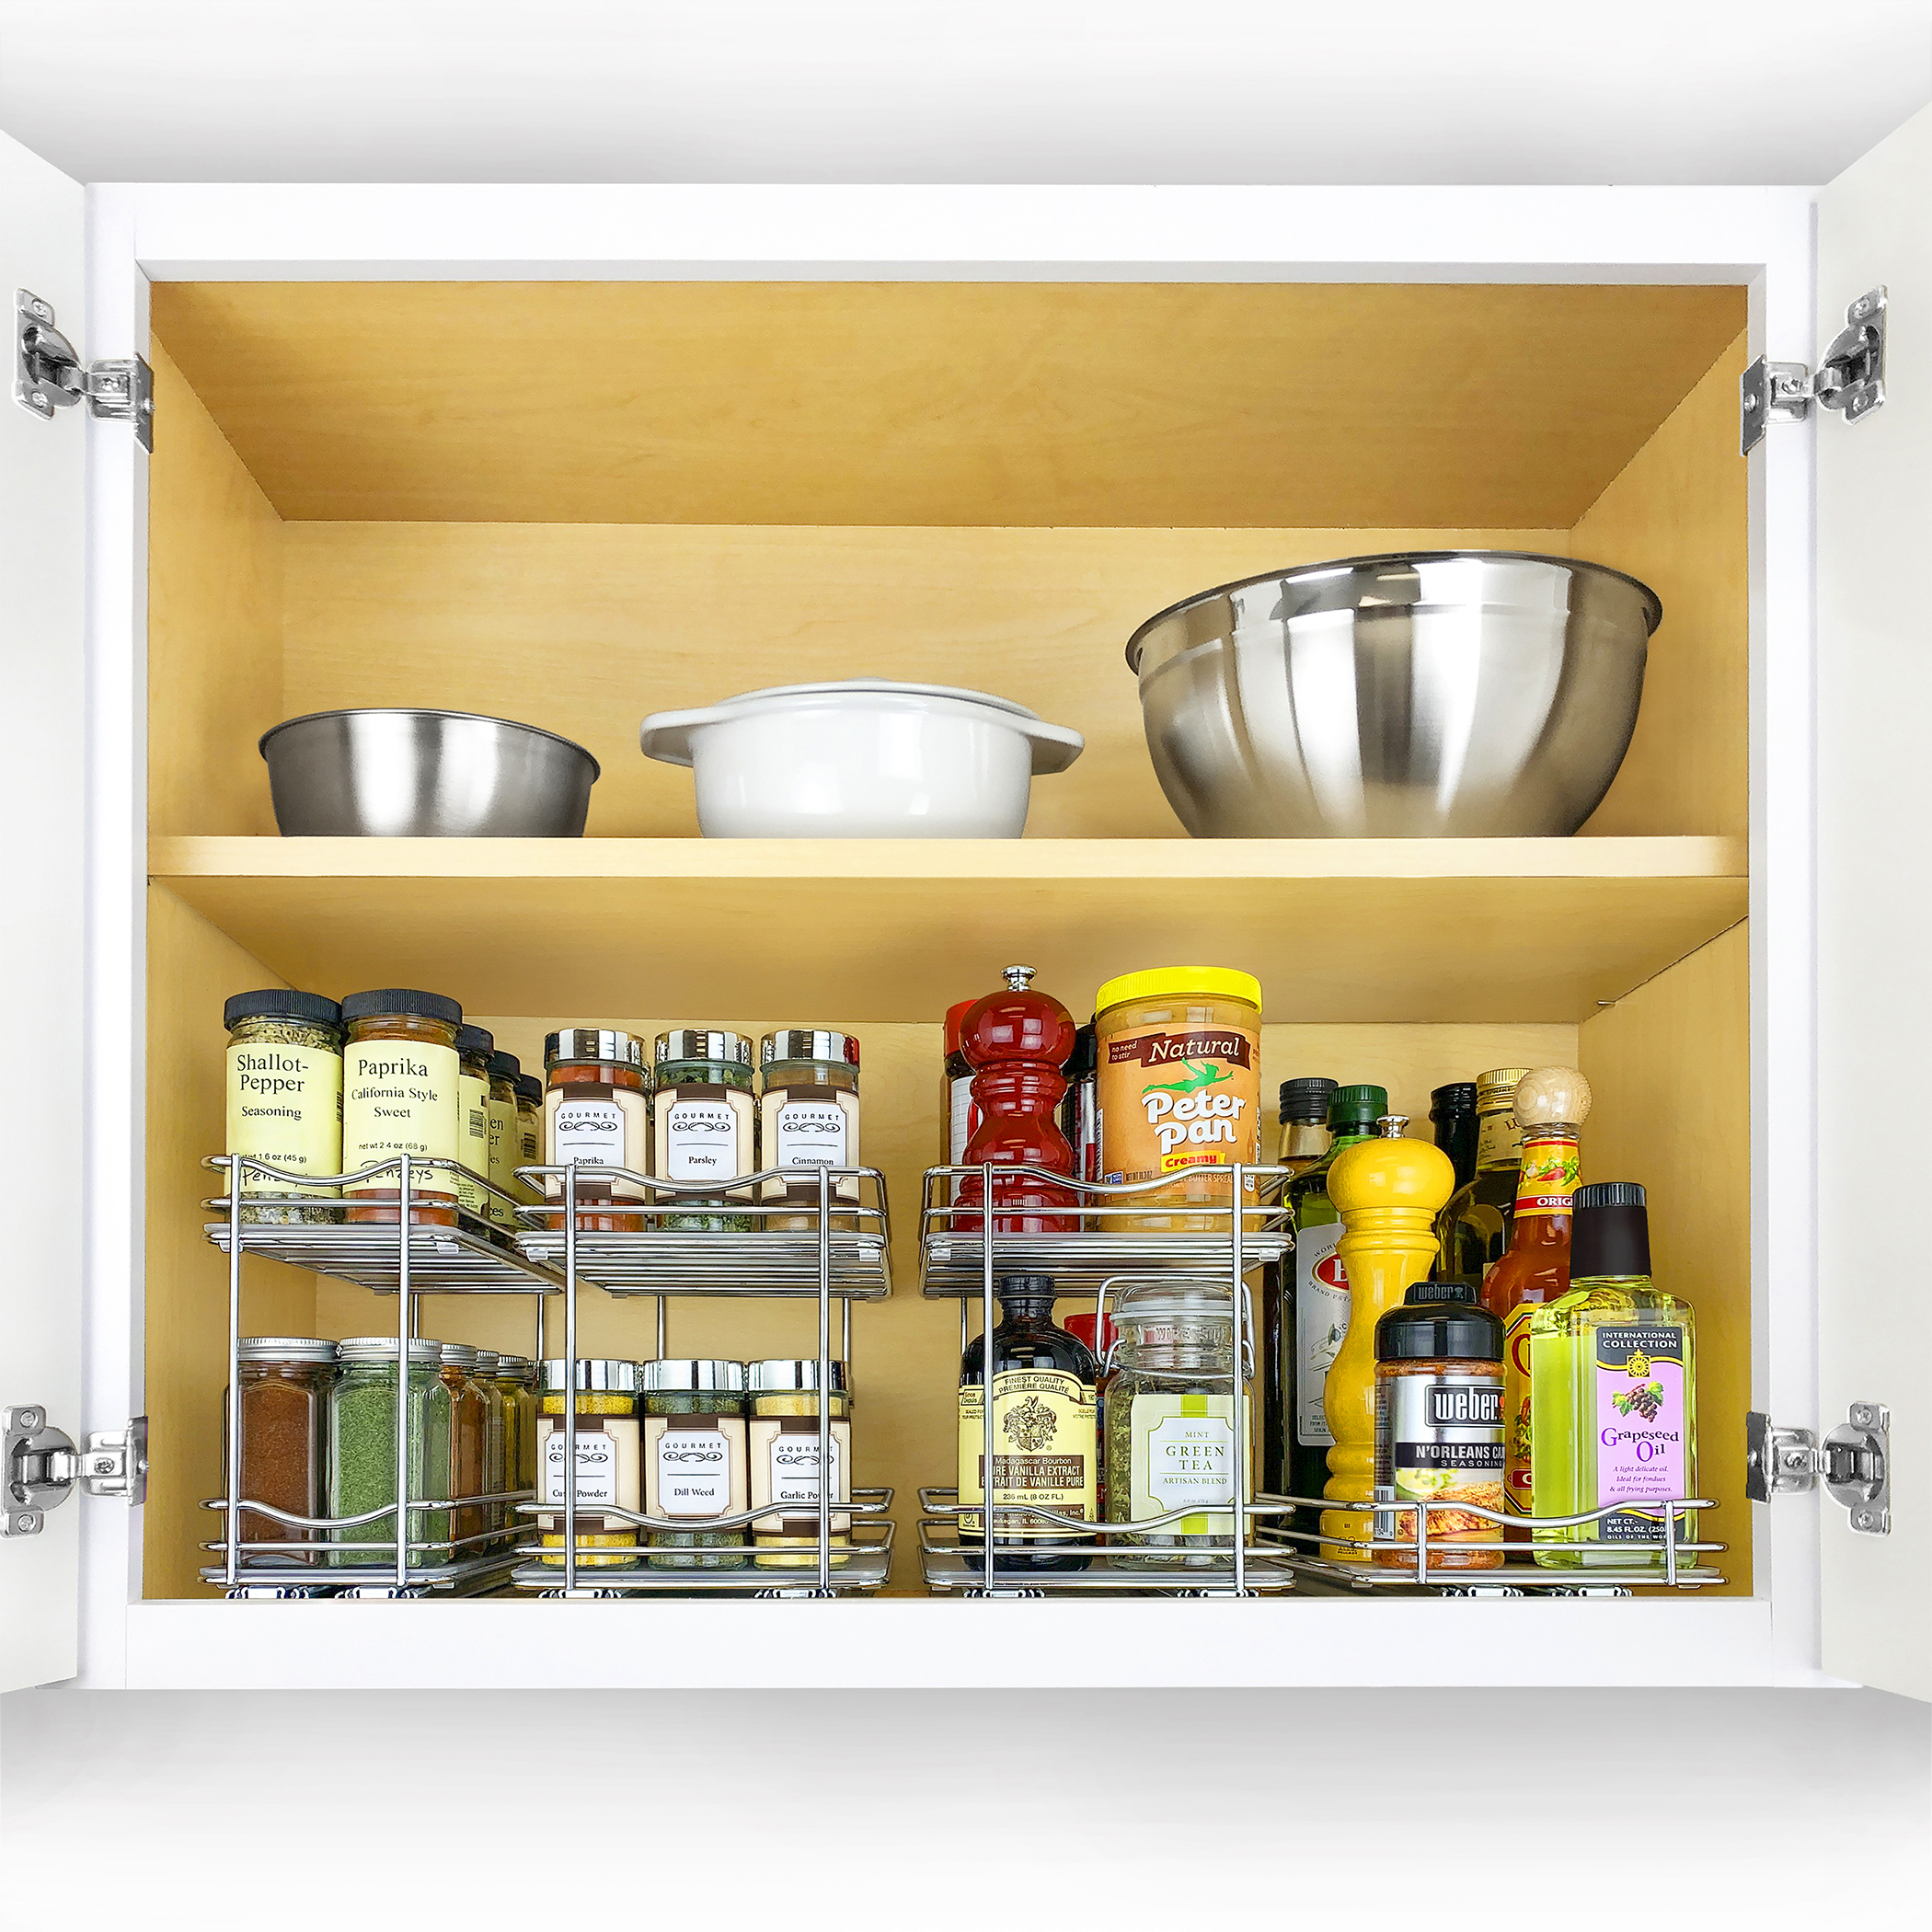 Lynk Professional Slide Out Double Spice Rack Upper Cabinet Organizer 6-1/4 Chrome 